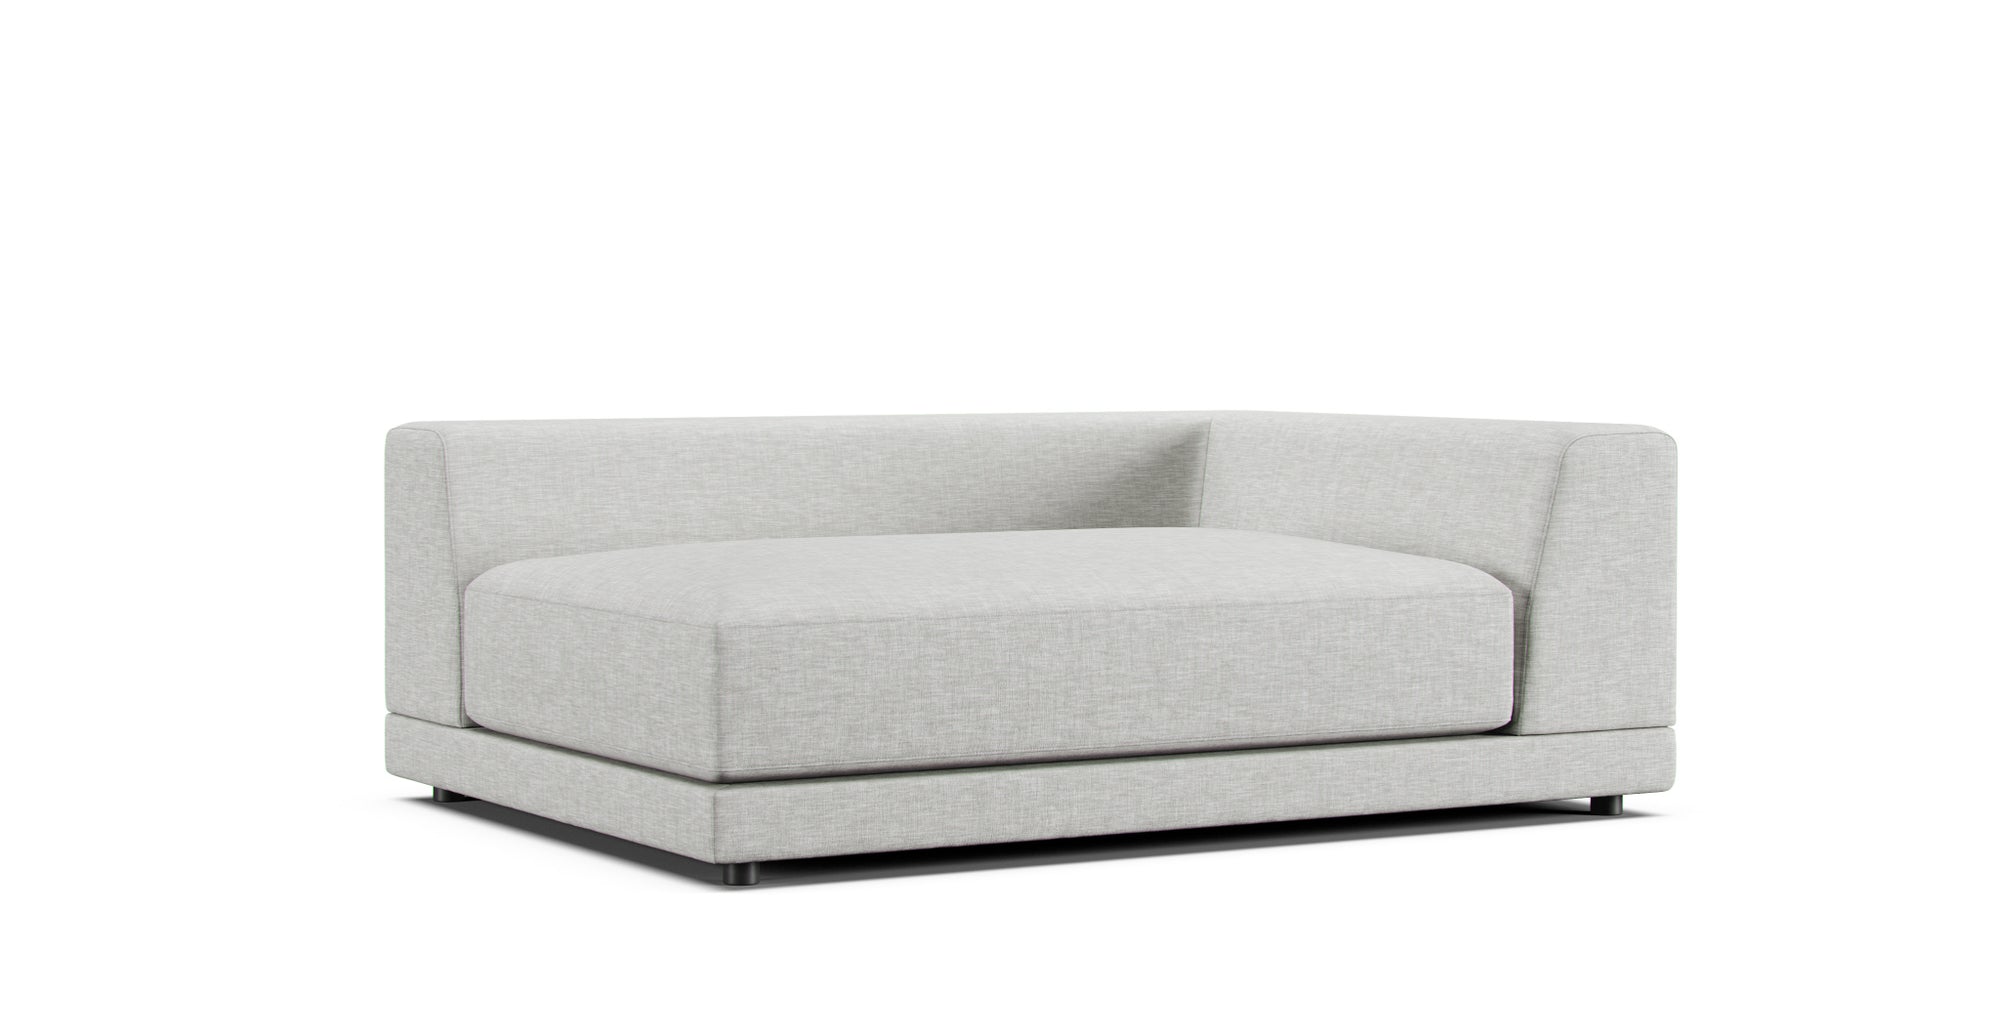 CB2 Uno sofa with a soft, durable and practical Everyday Weave Pebble slipcover